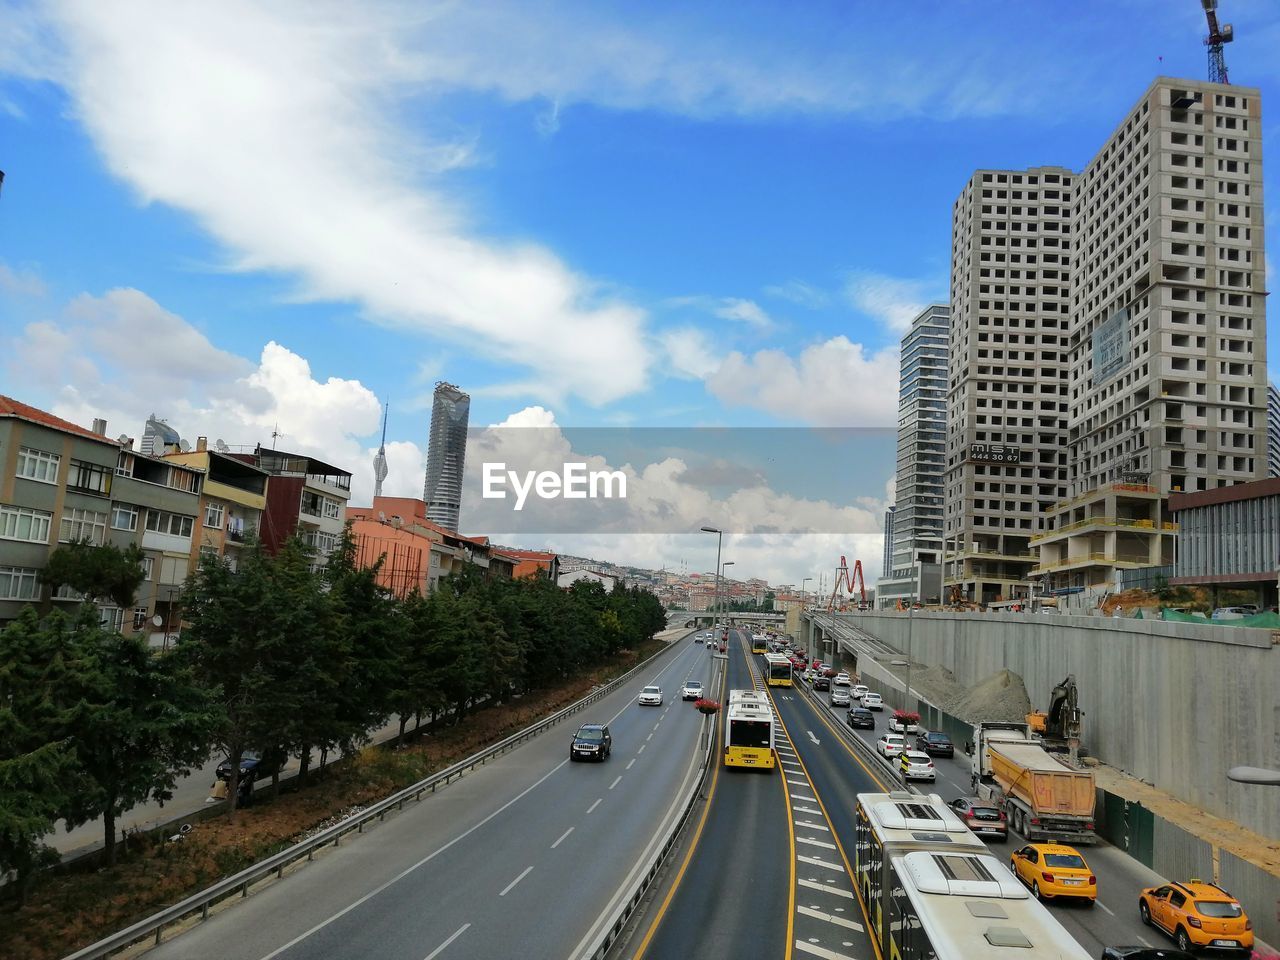 VEHICLES ON ROAD AMIDST BUILDINGS AGAINST SKY